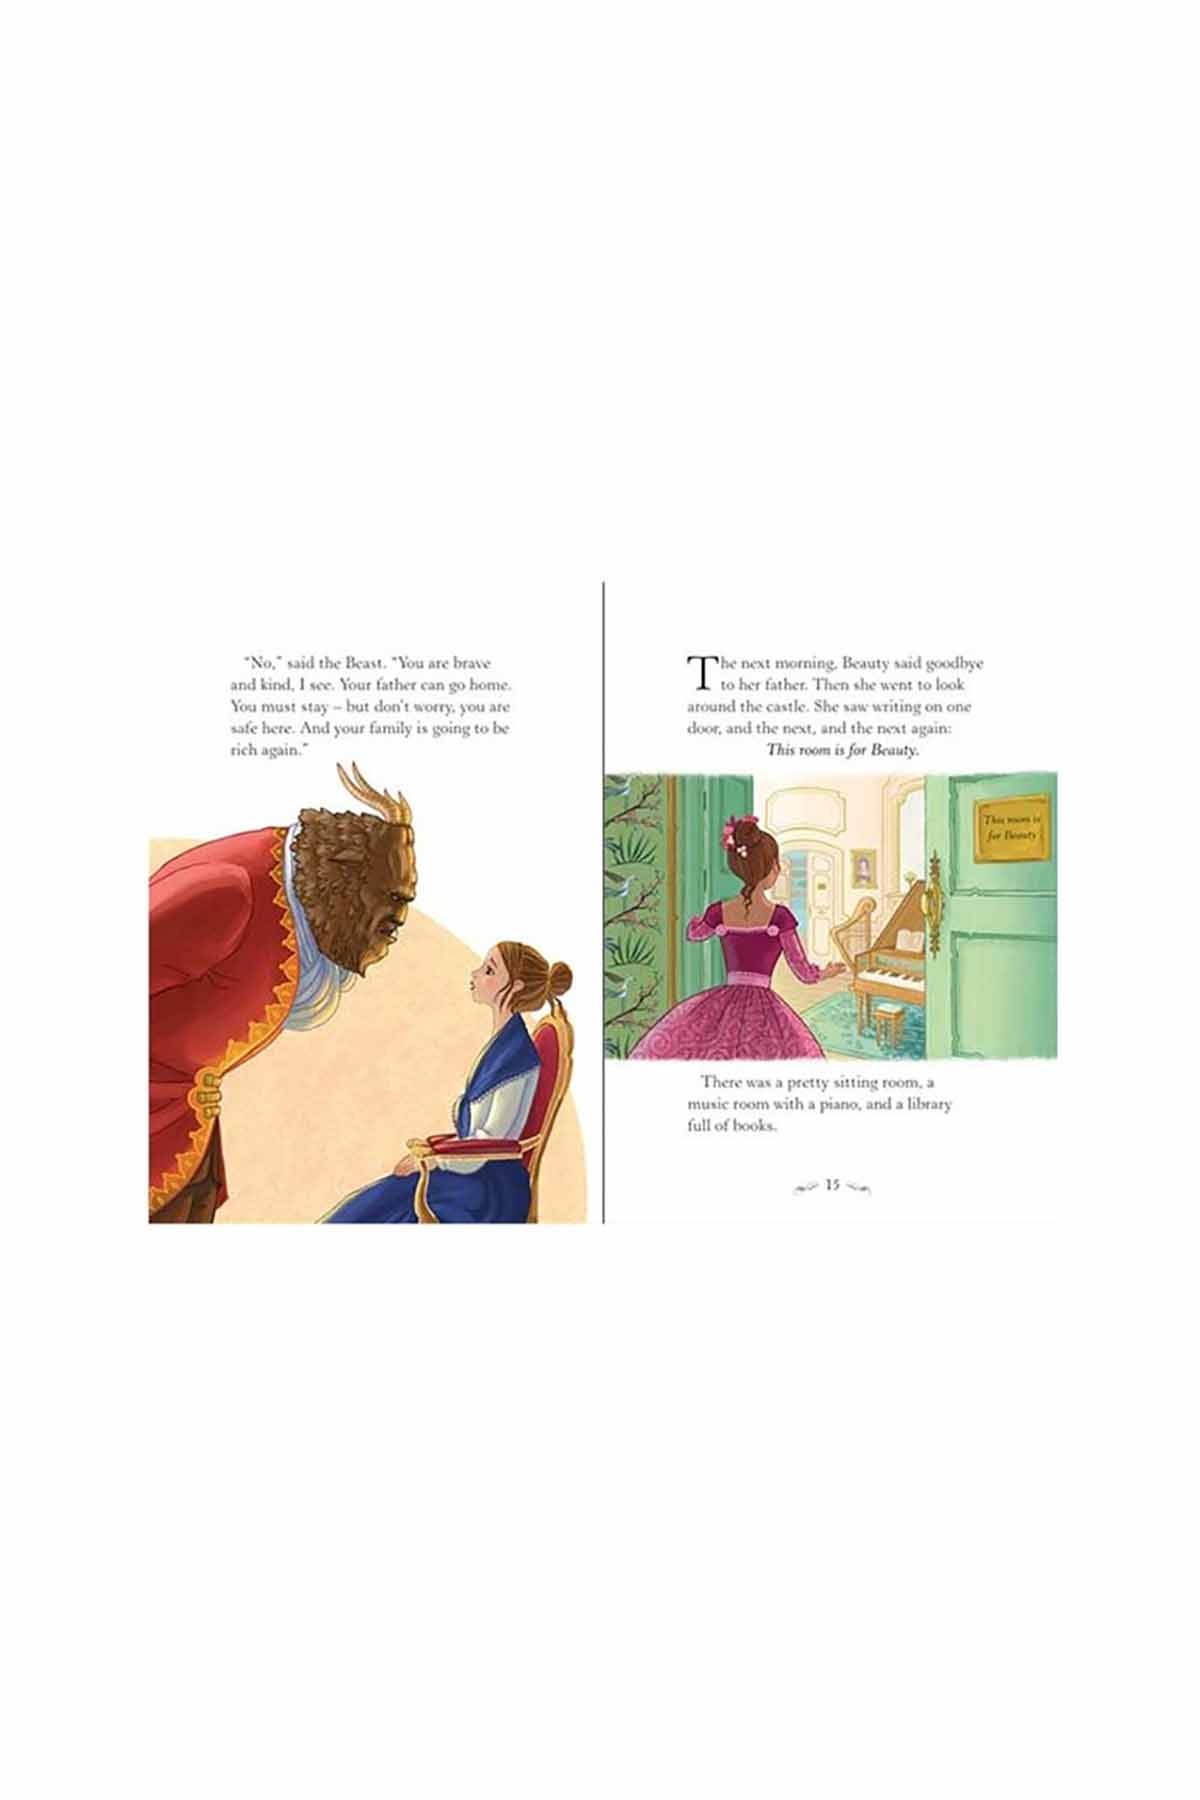 The Usborne Beauty and the Beast